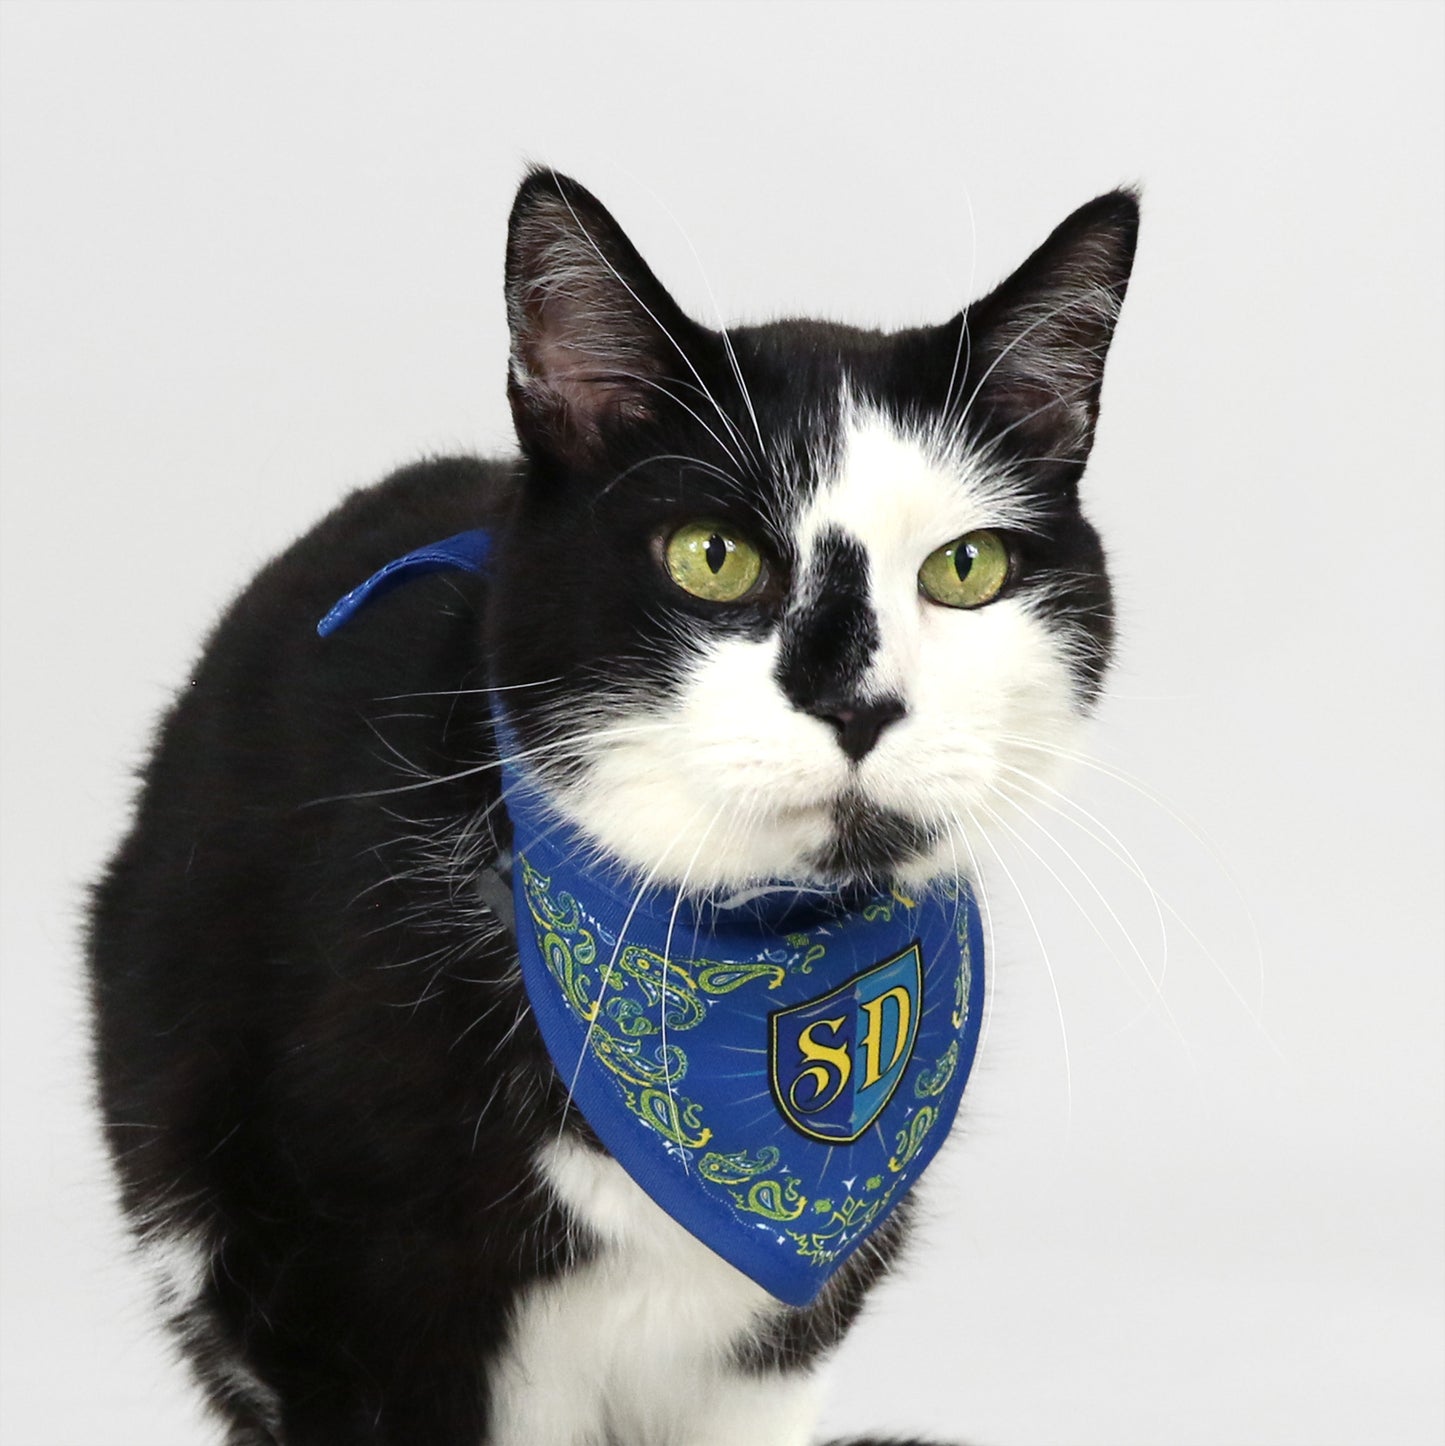 Bottlecat the Black and White Cat wearing the Halftime Deluxe Pet Bandana in size Small.